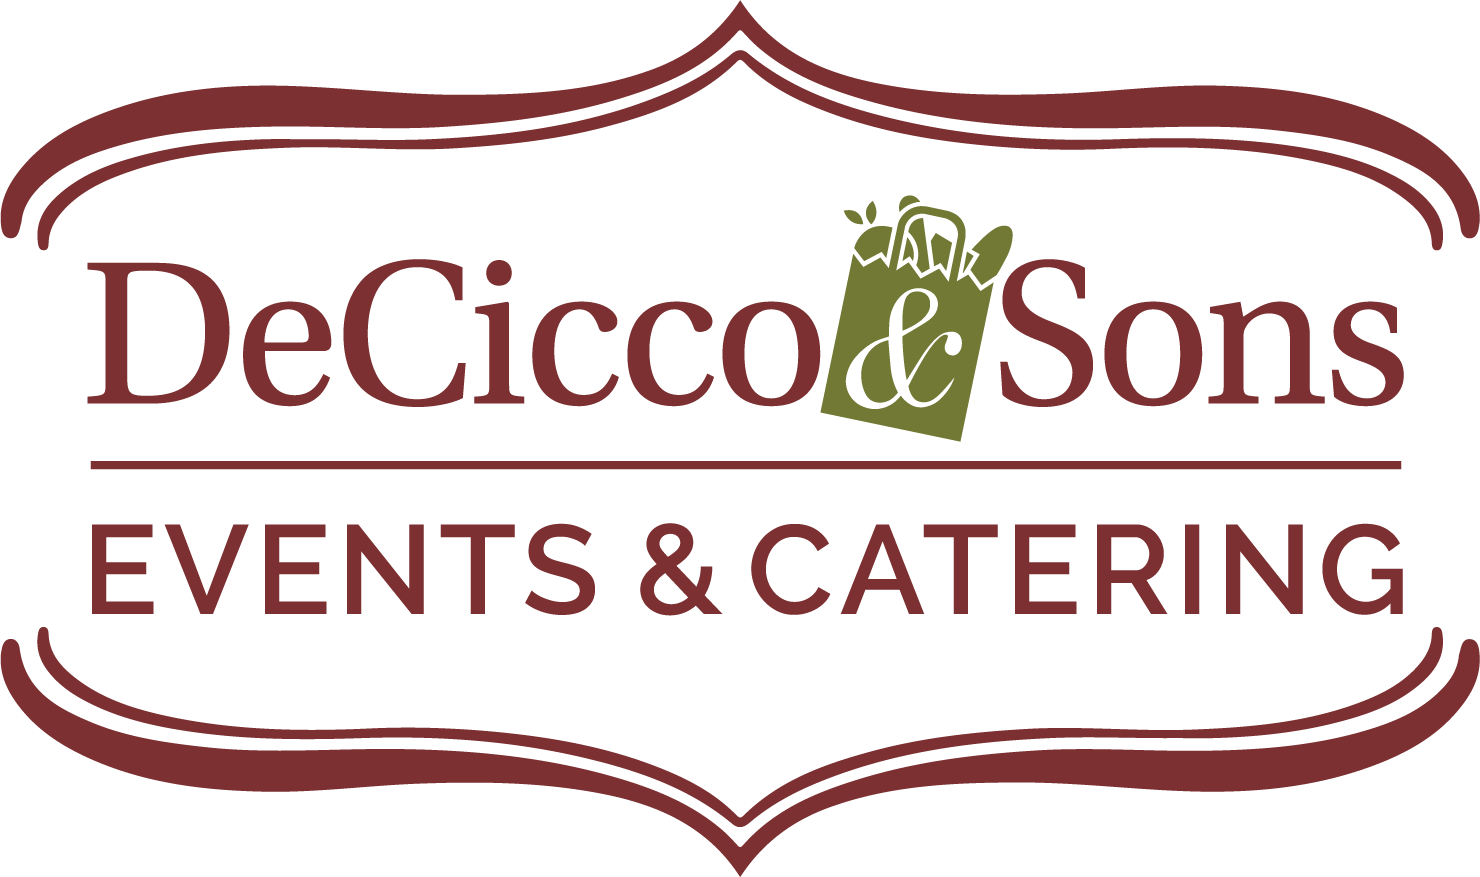 DeCicco & Sons Events & Catering Logo